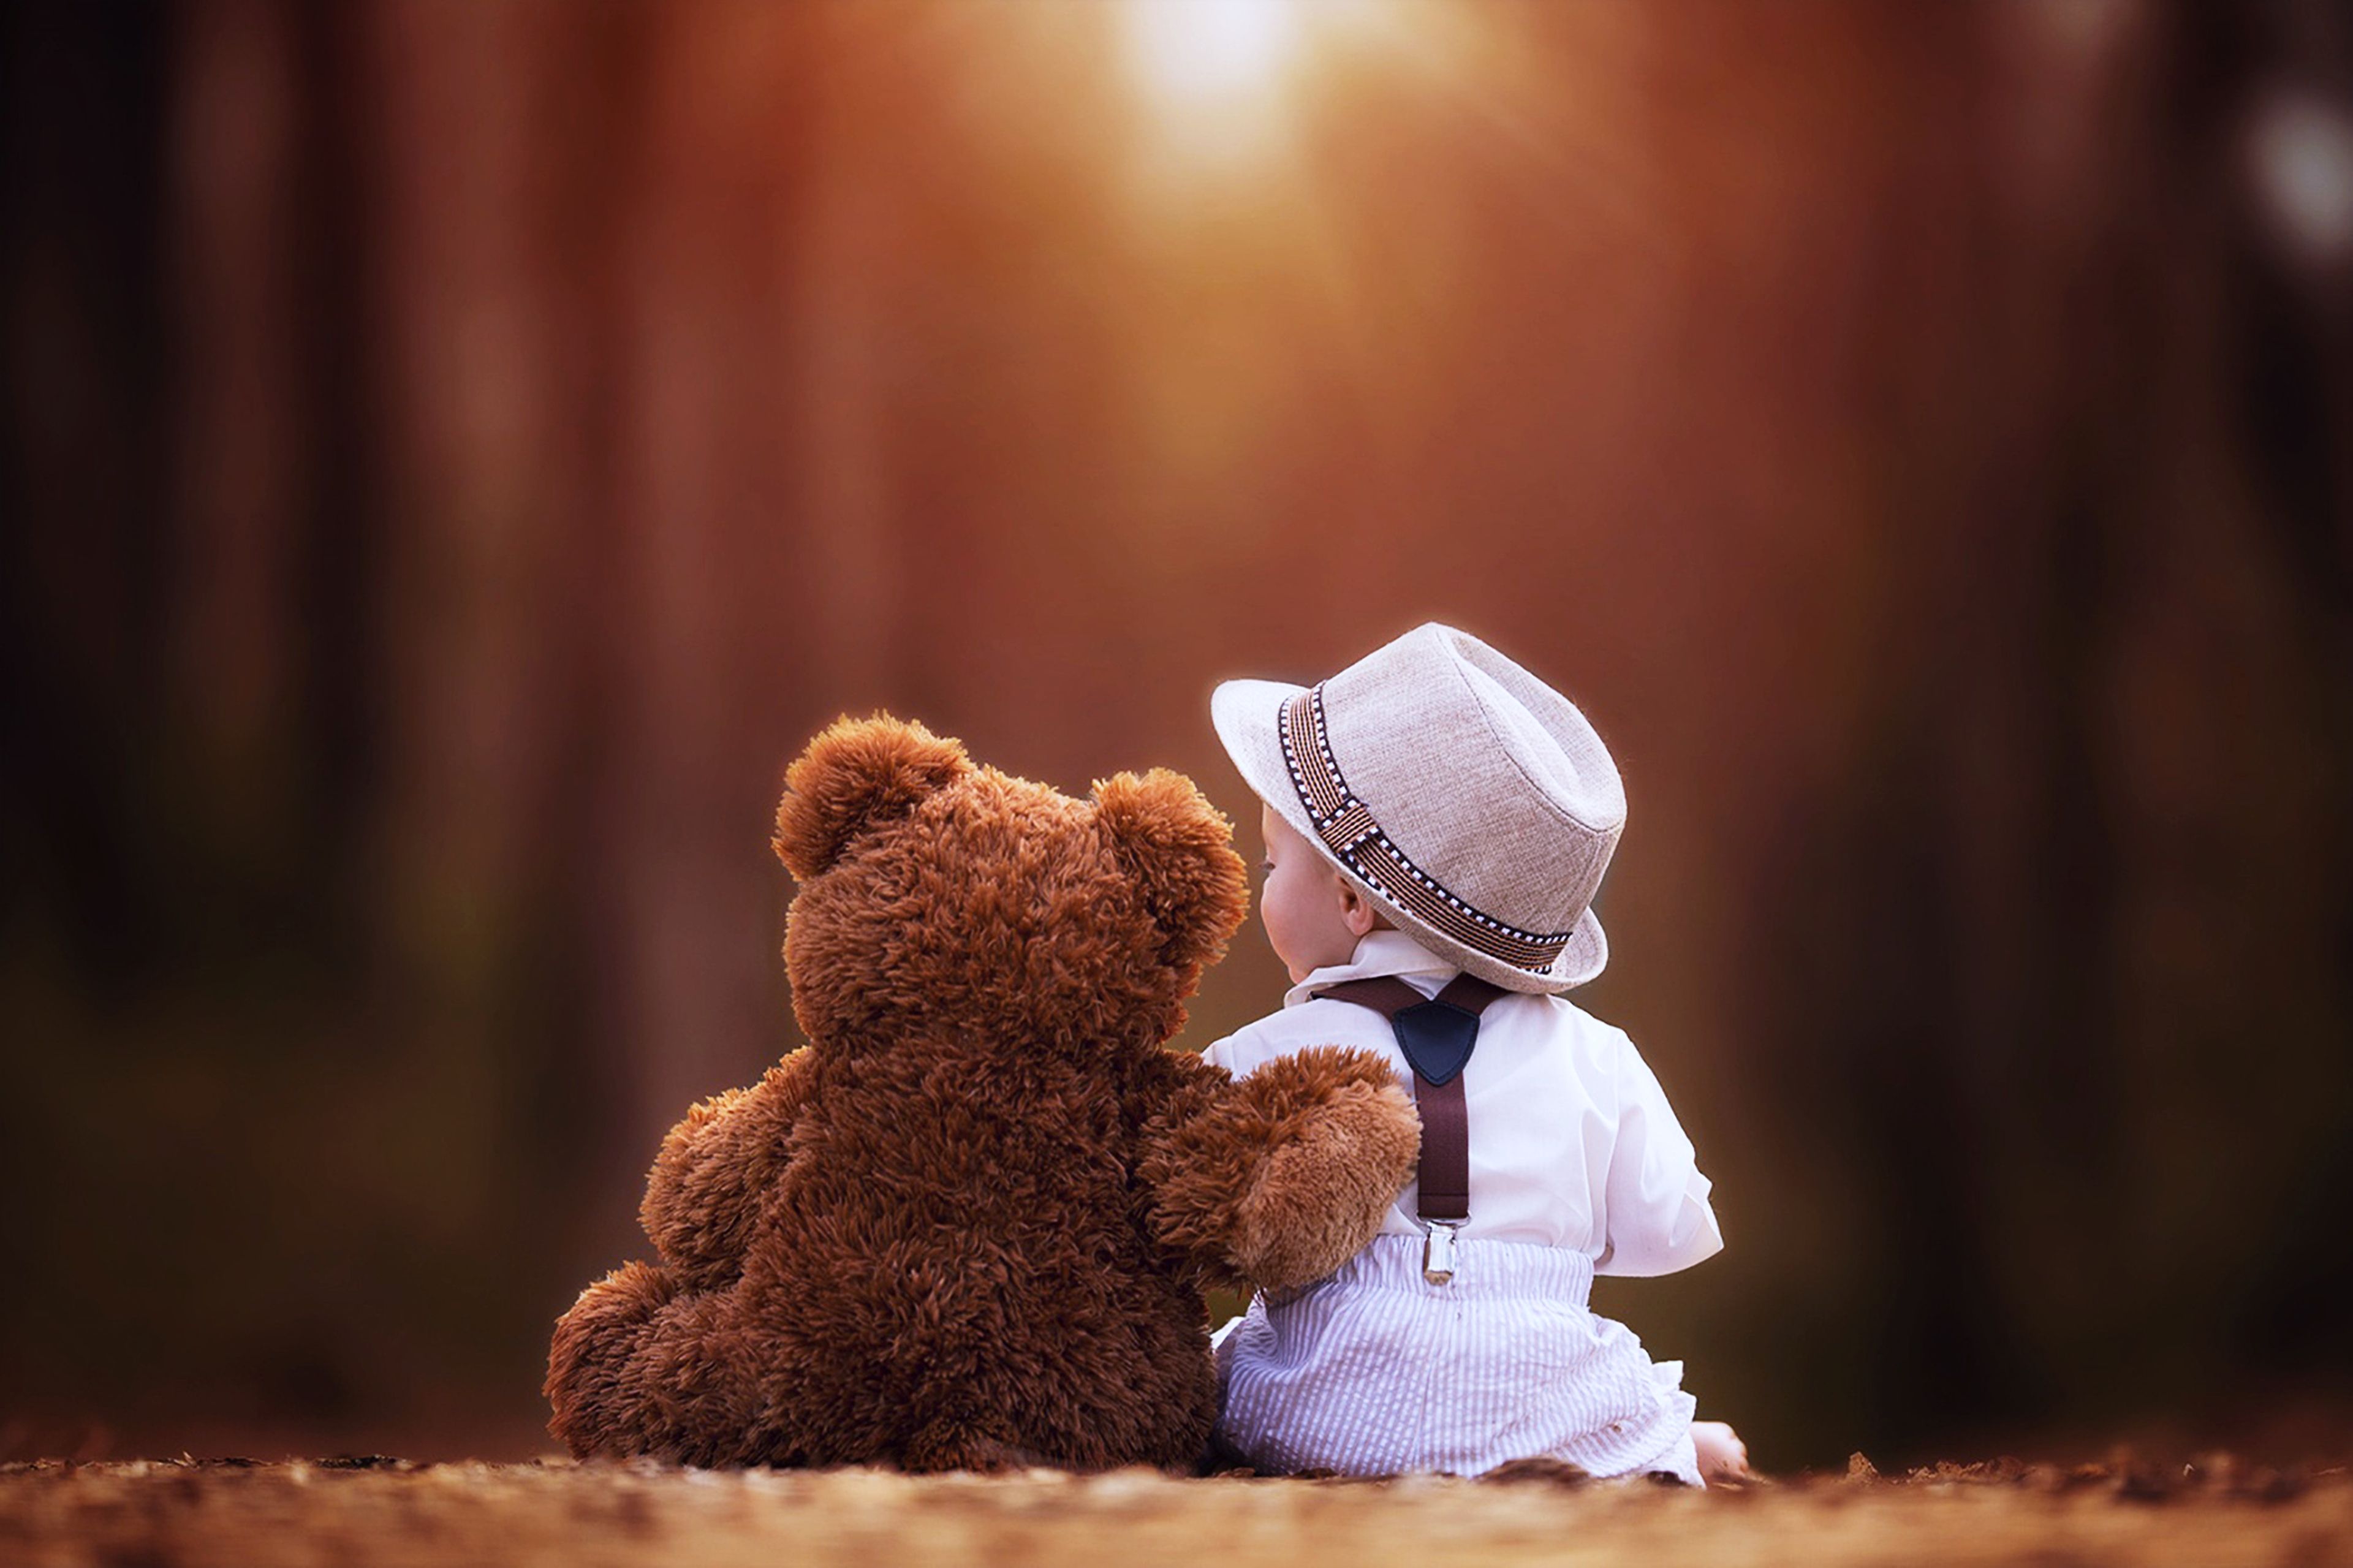 Cute Baby And Teddy Bear Wallpaper - DreamLoveBackgrounds